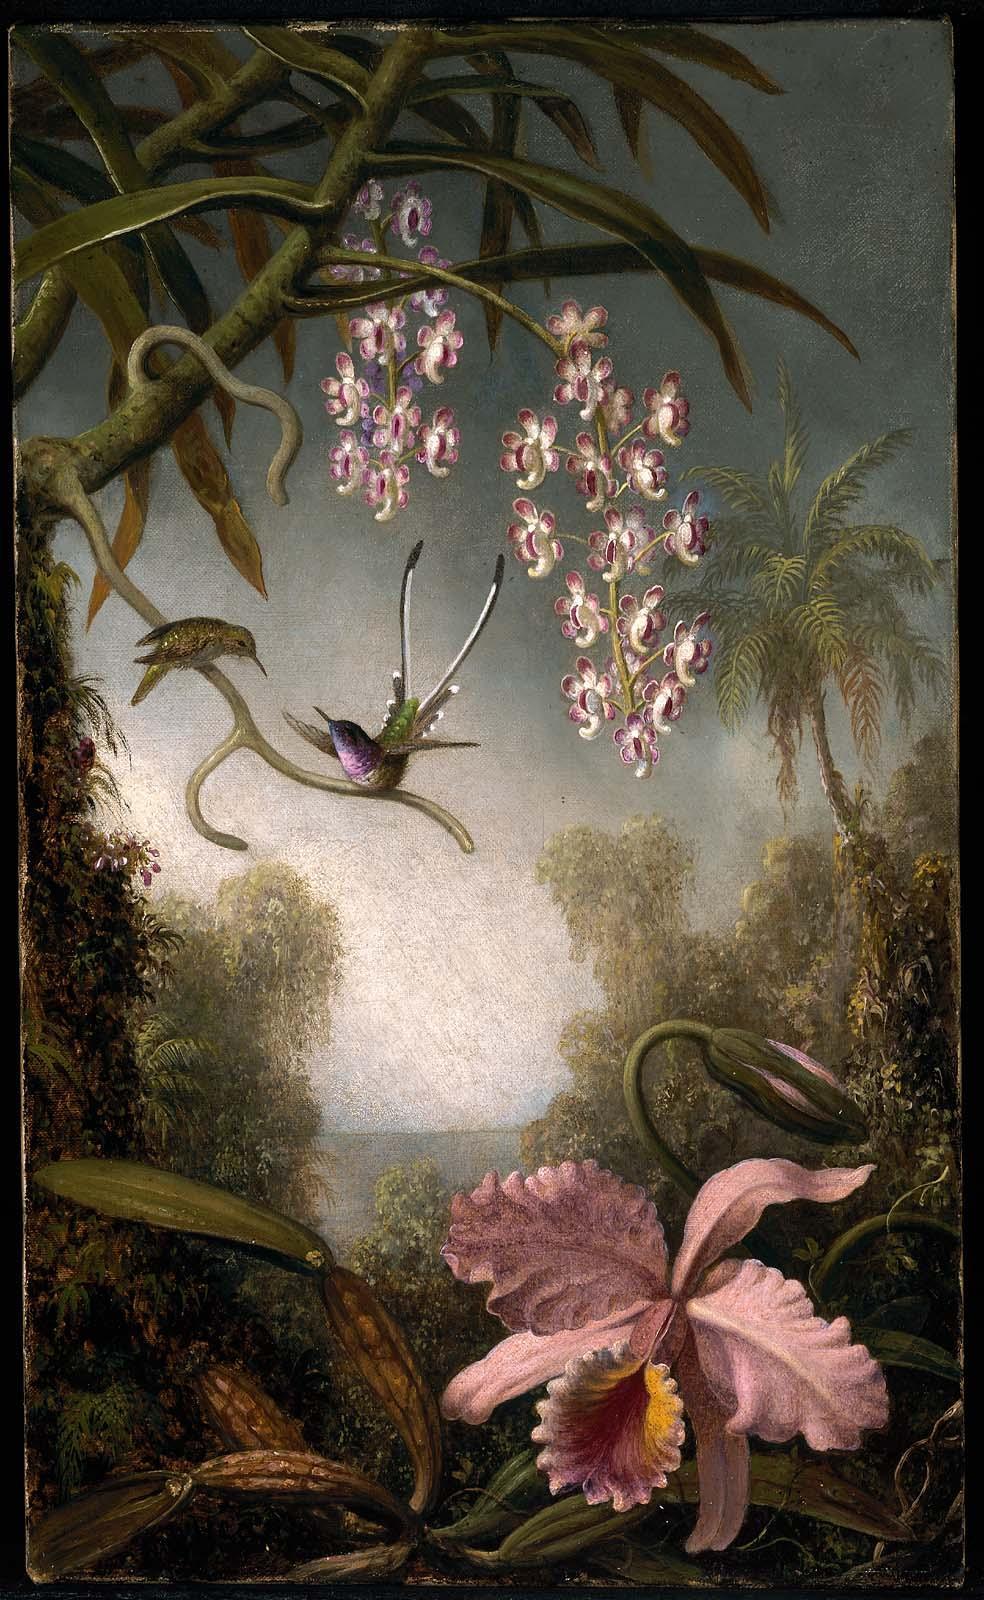 Realistic painting; a large pink orchid flowers in the foreground. Birds and lush foliage in the background. Sky gradiates, lightest at center